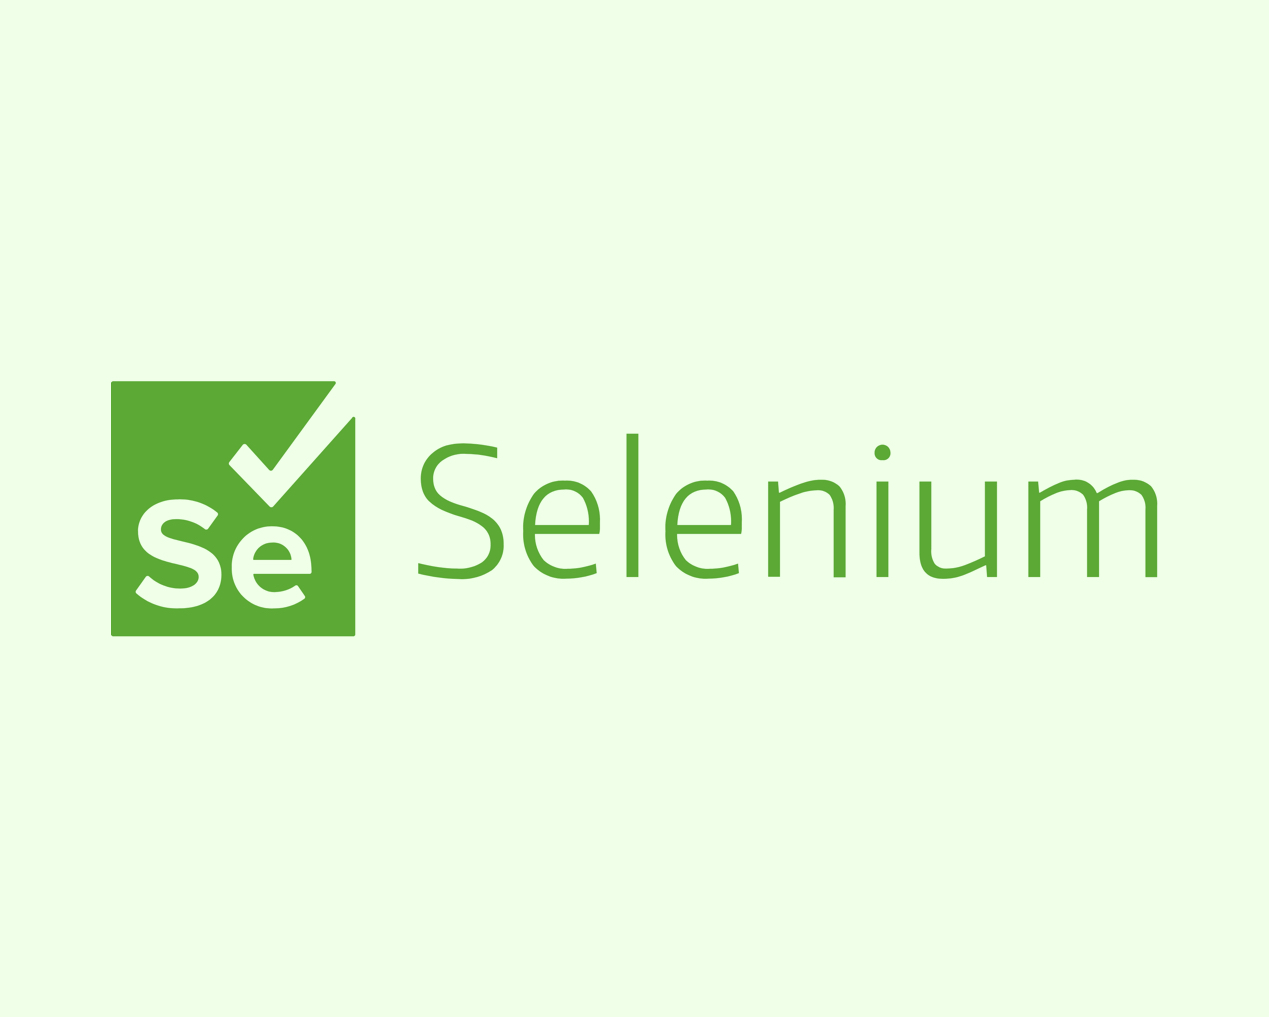 Getting Started With Maven For Selenium Testing 